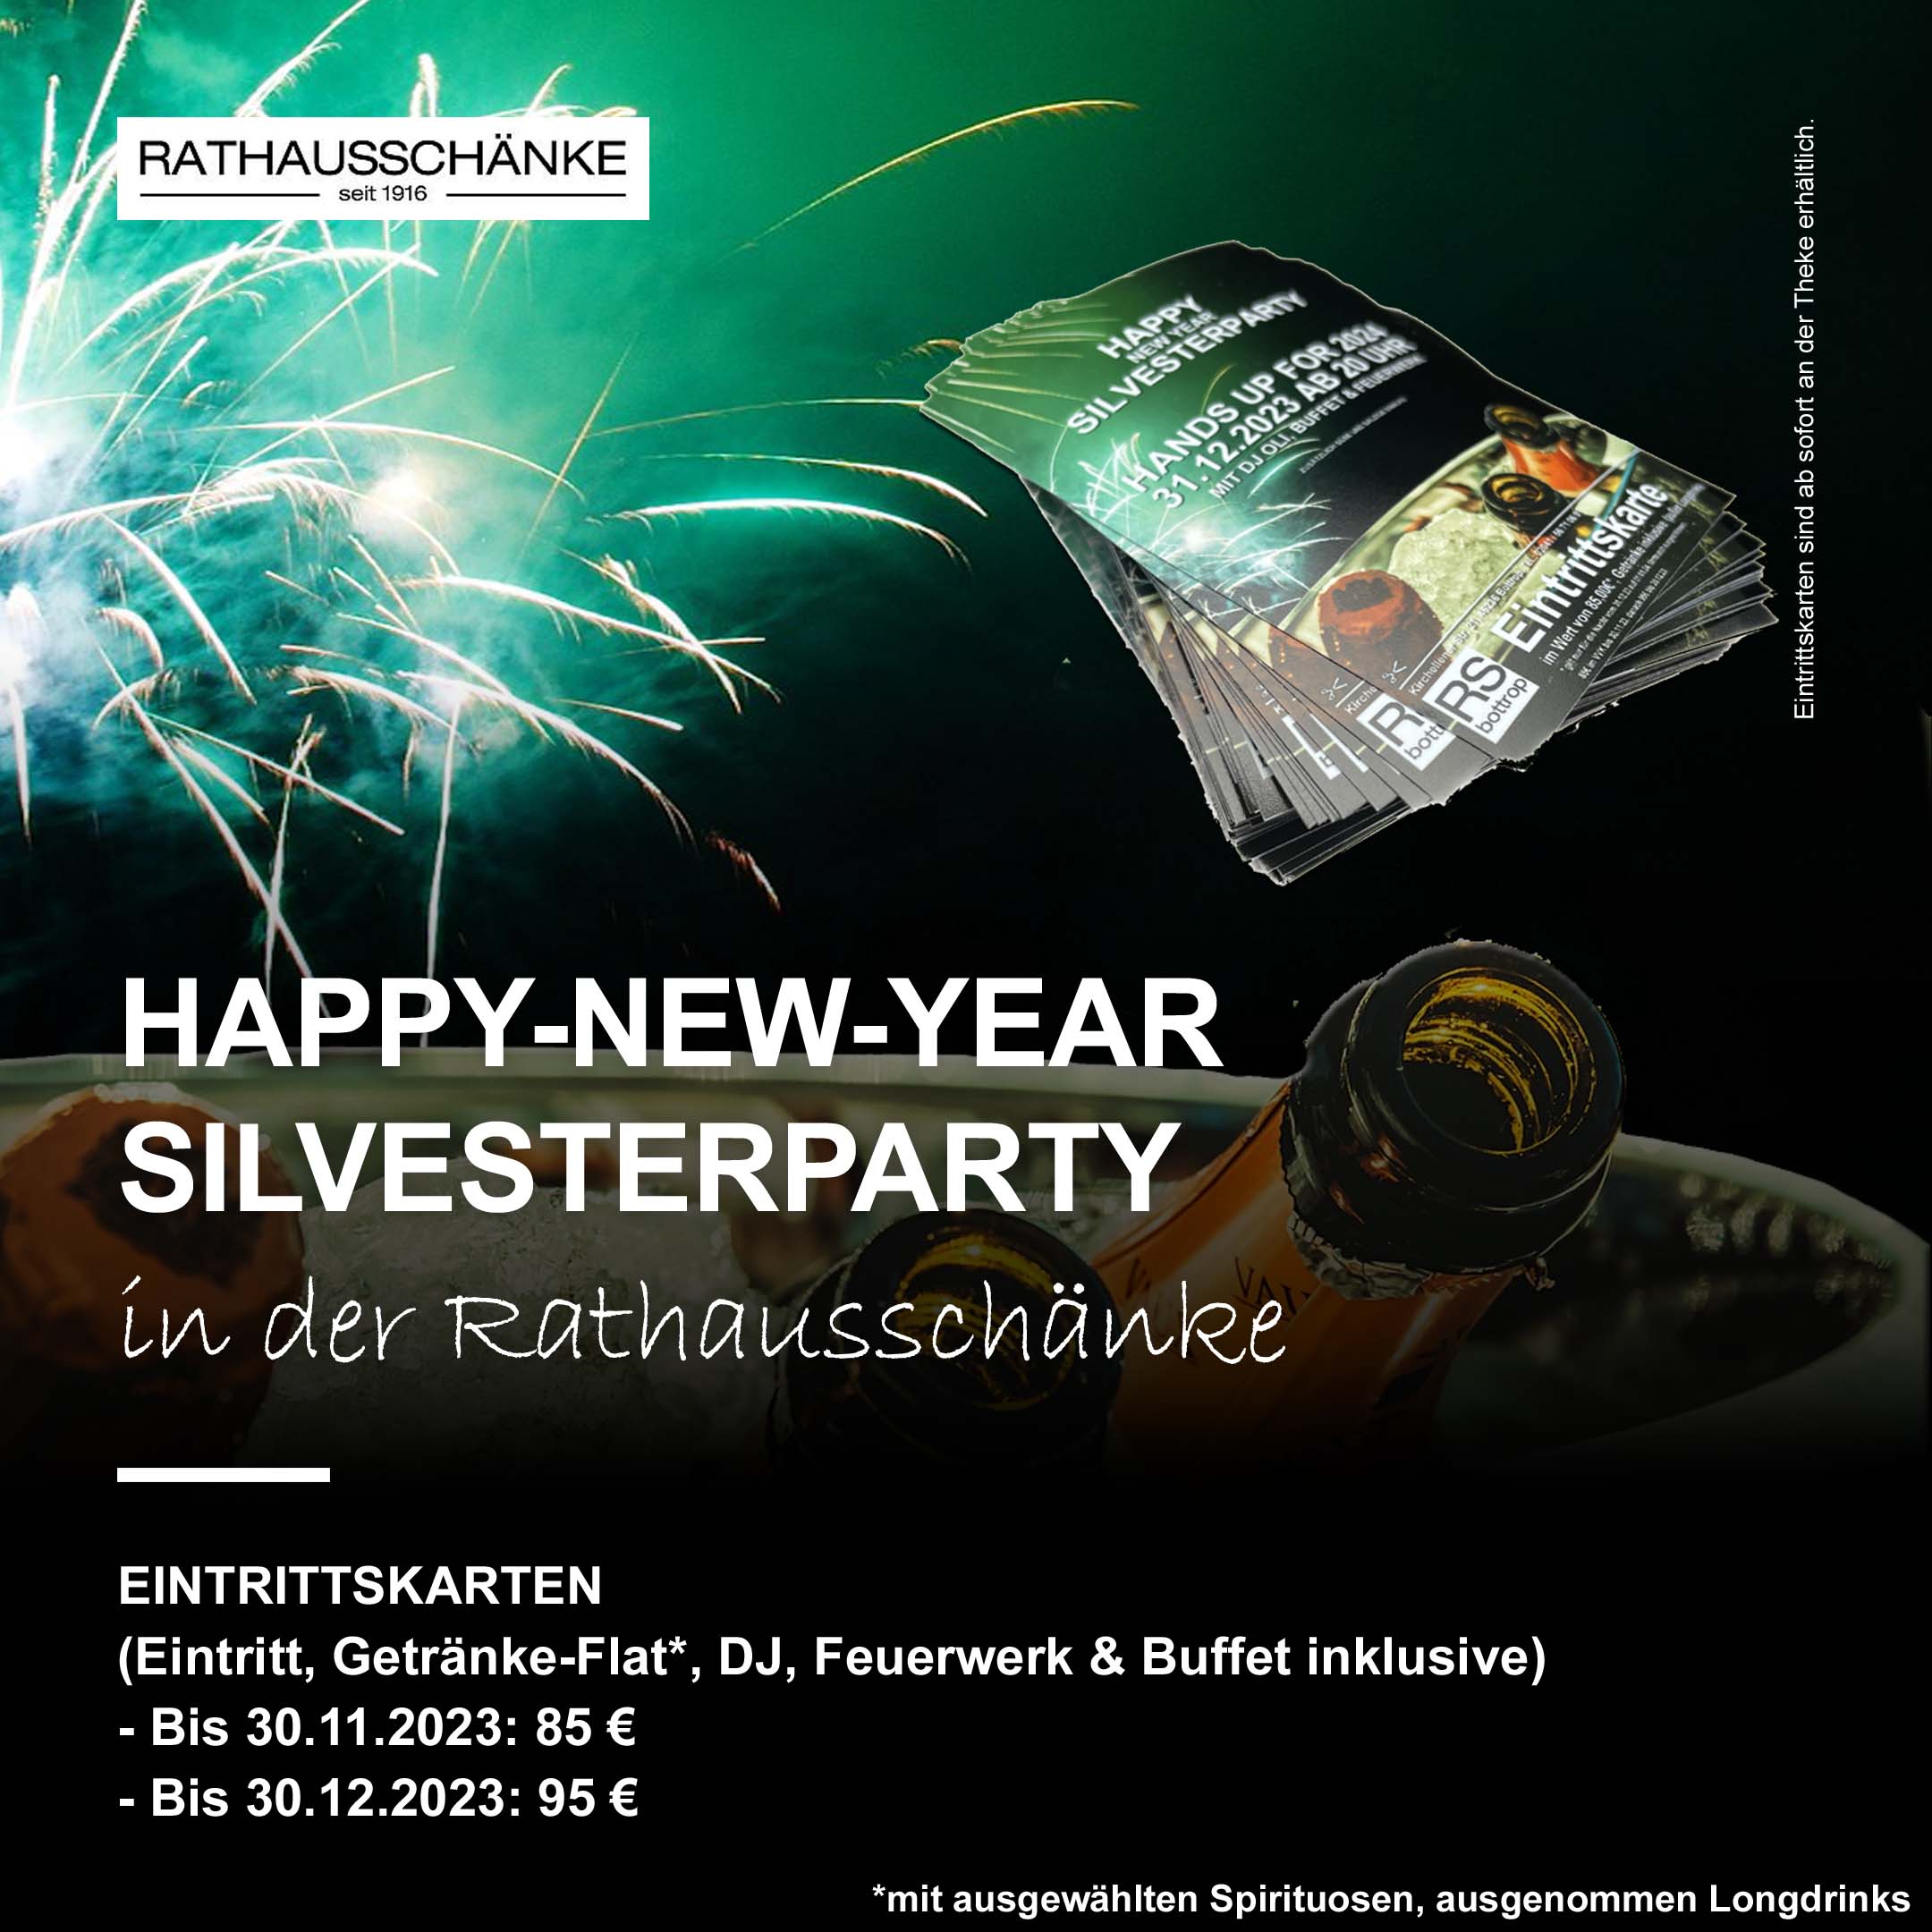 HAPPY-NEW-YEAR Silvesterparty